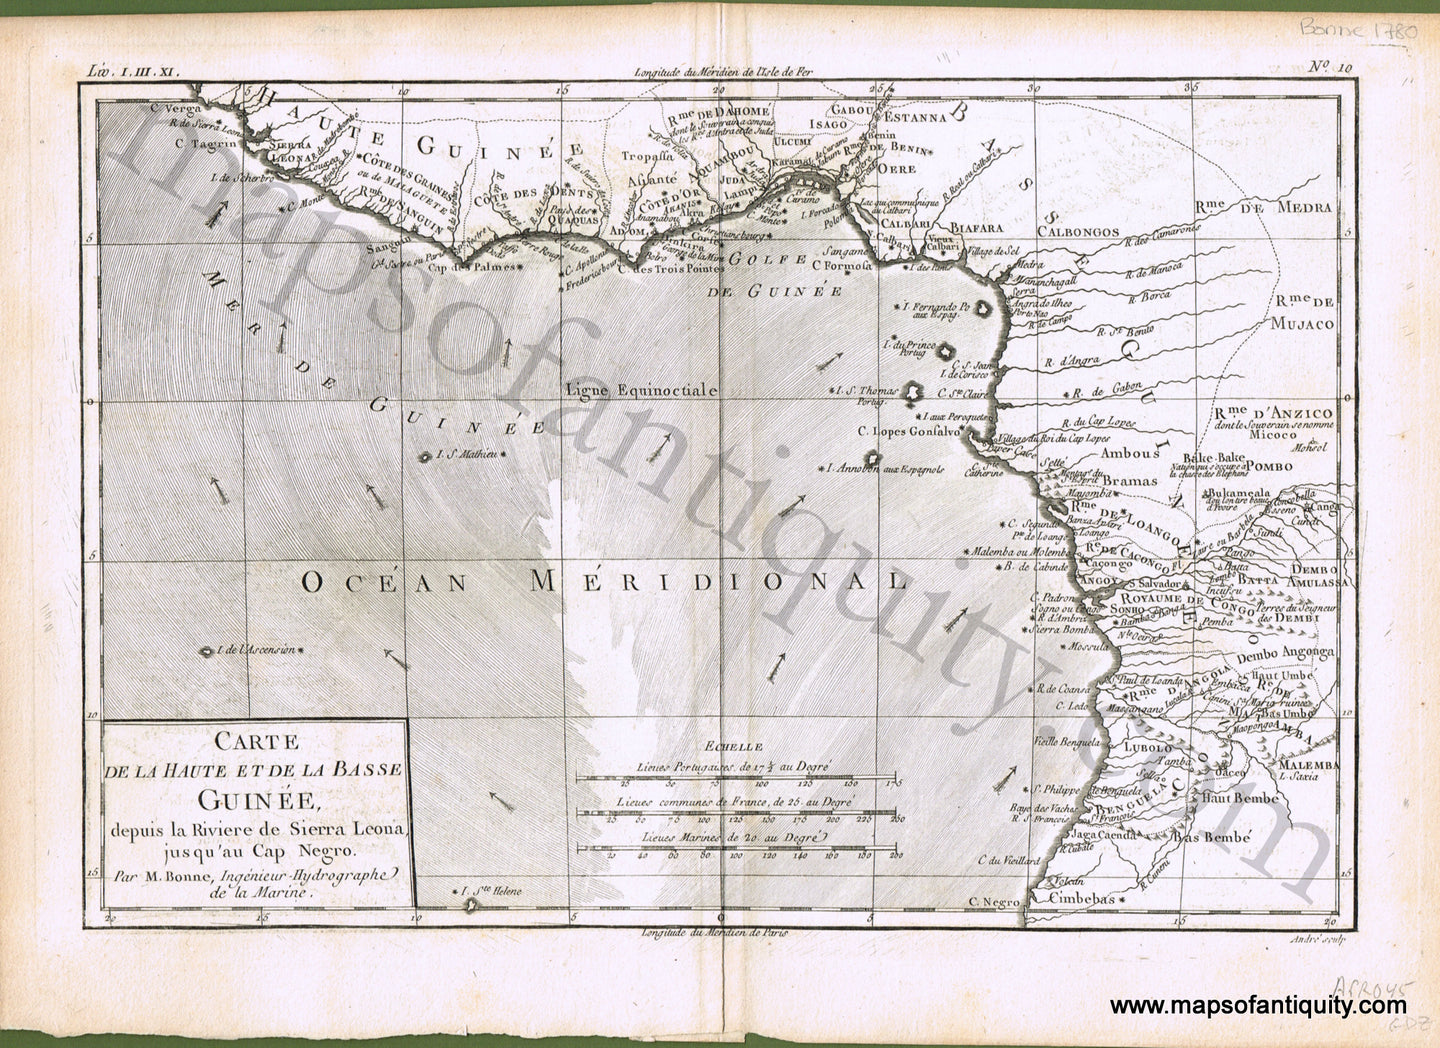 Black-and-White-Antique-Map-Carte-de-la-Haute-et-Basse-Guinee-Africa-Africa--1780-Raynal-and-Bonne-Maps-Of-Antiquity